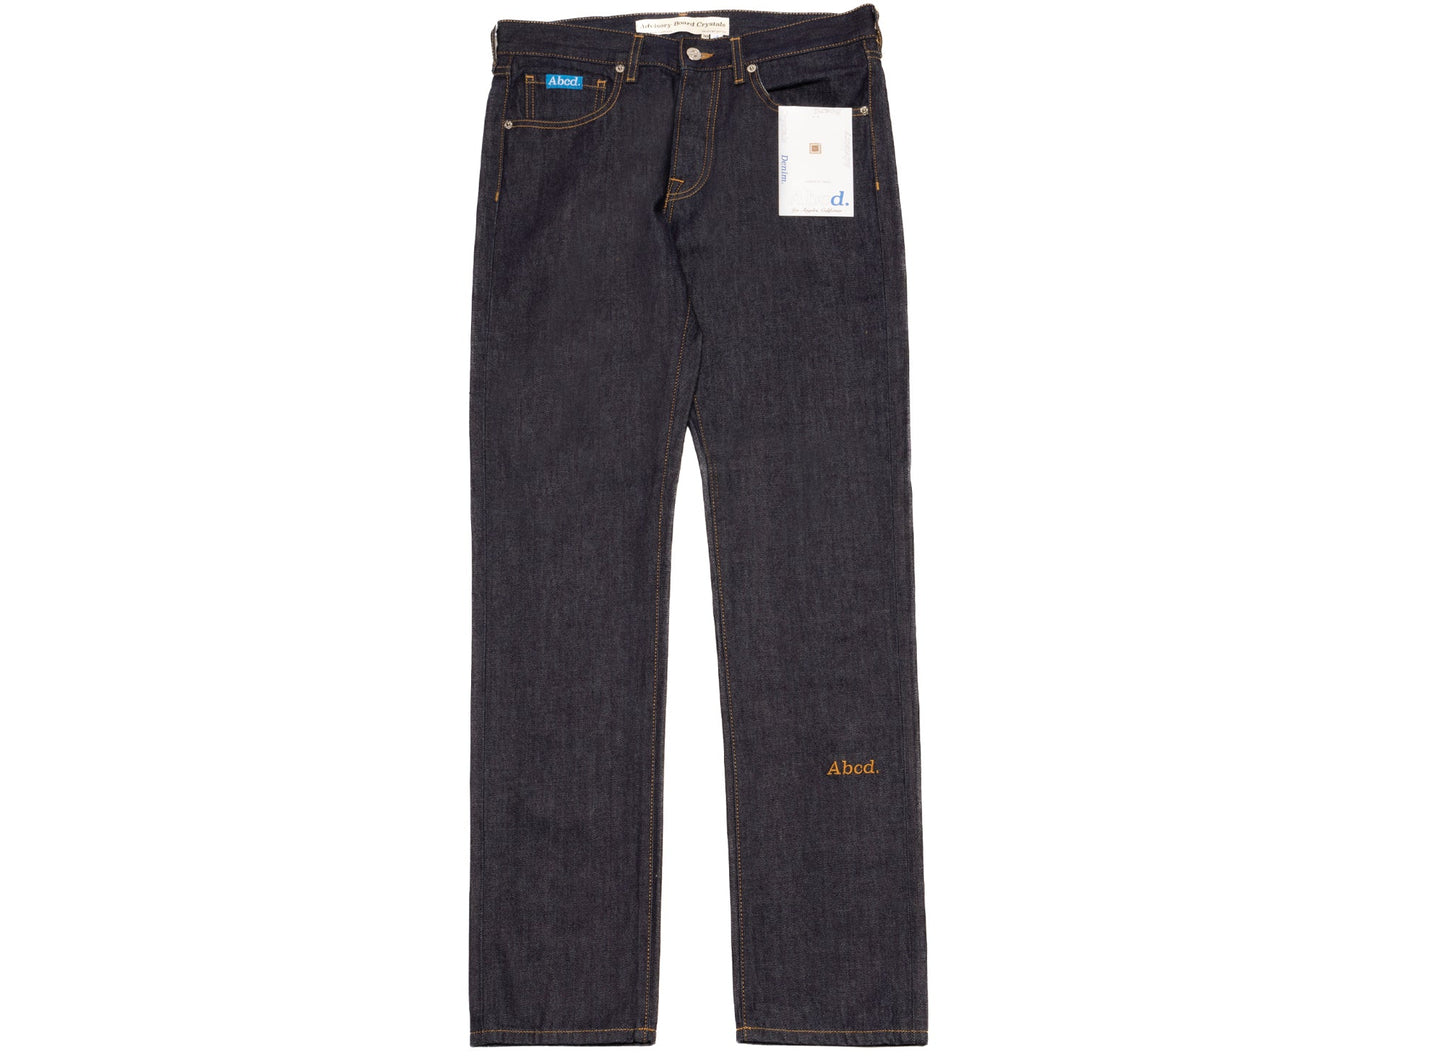 Advisory Board Crystals Abcd. Slim Fit Jeans in Rinse